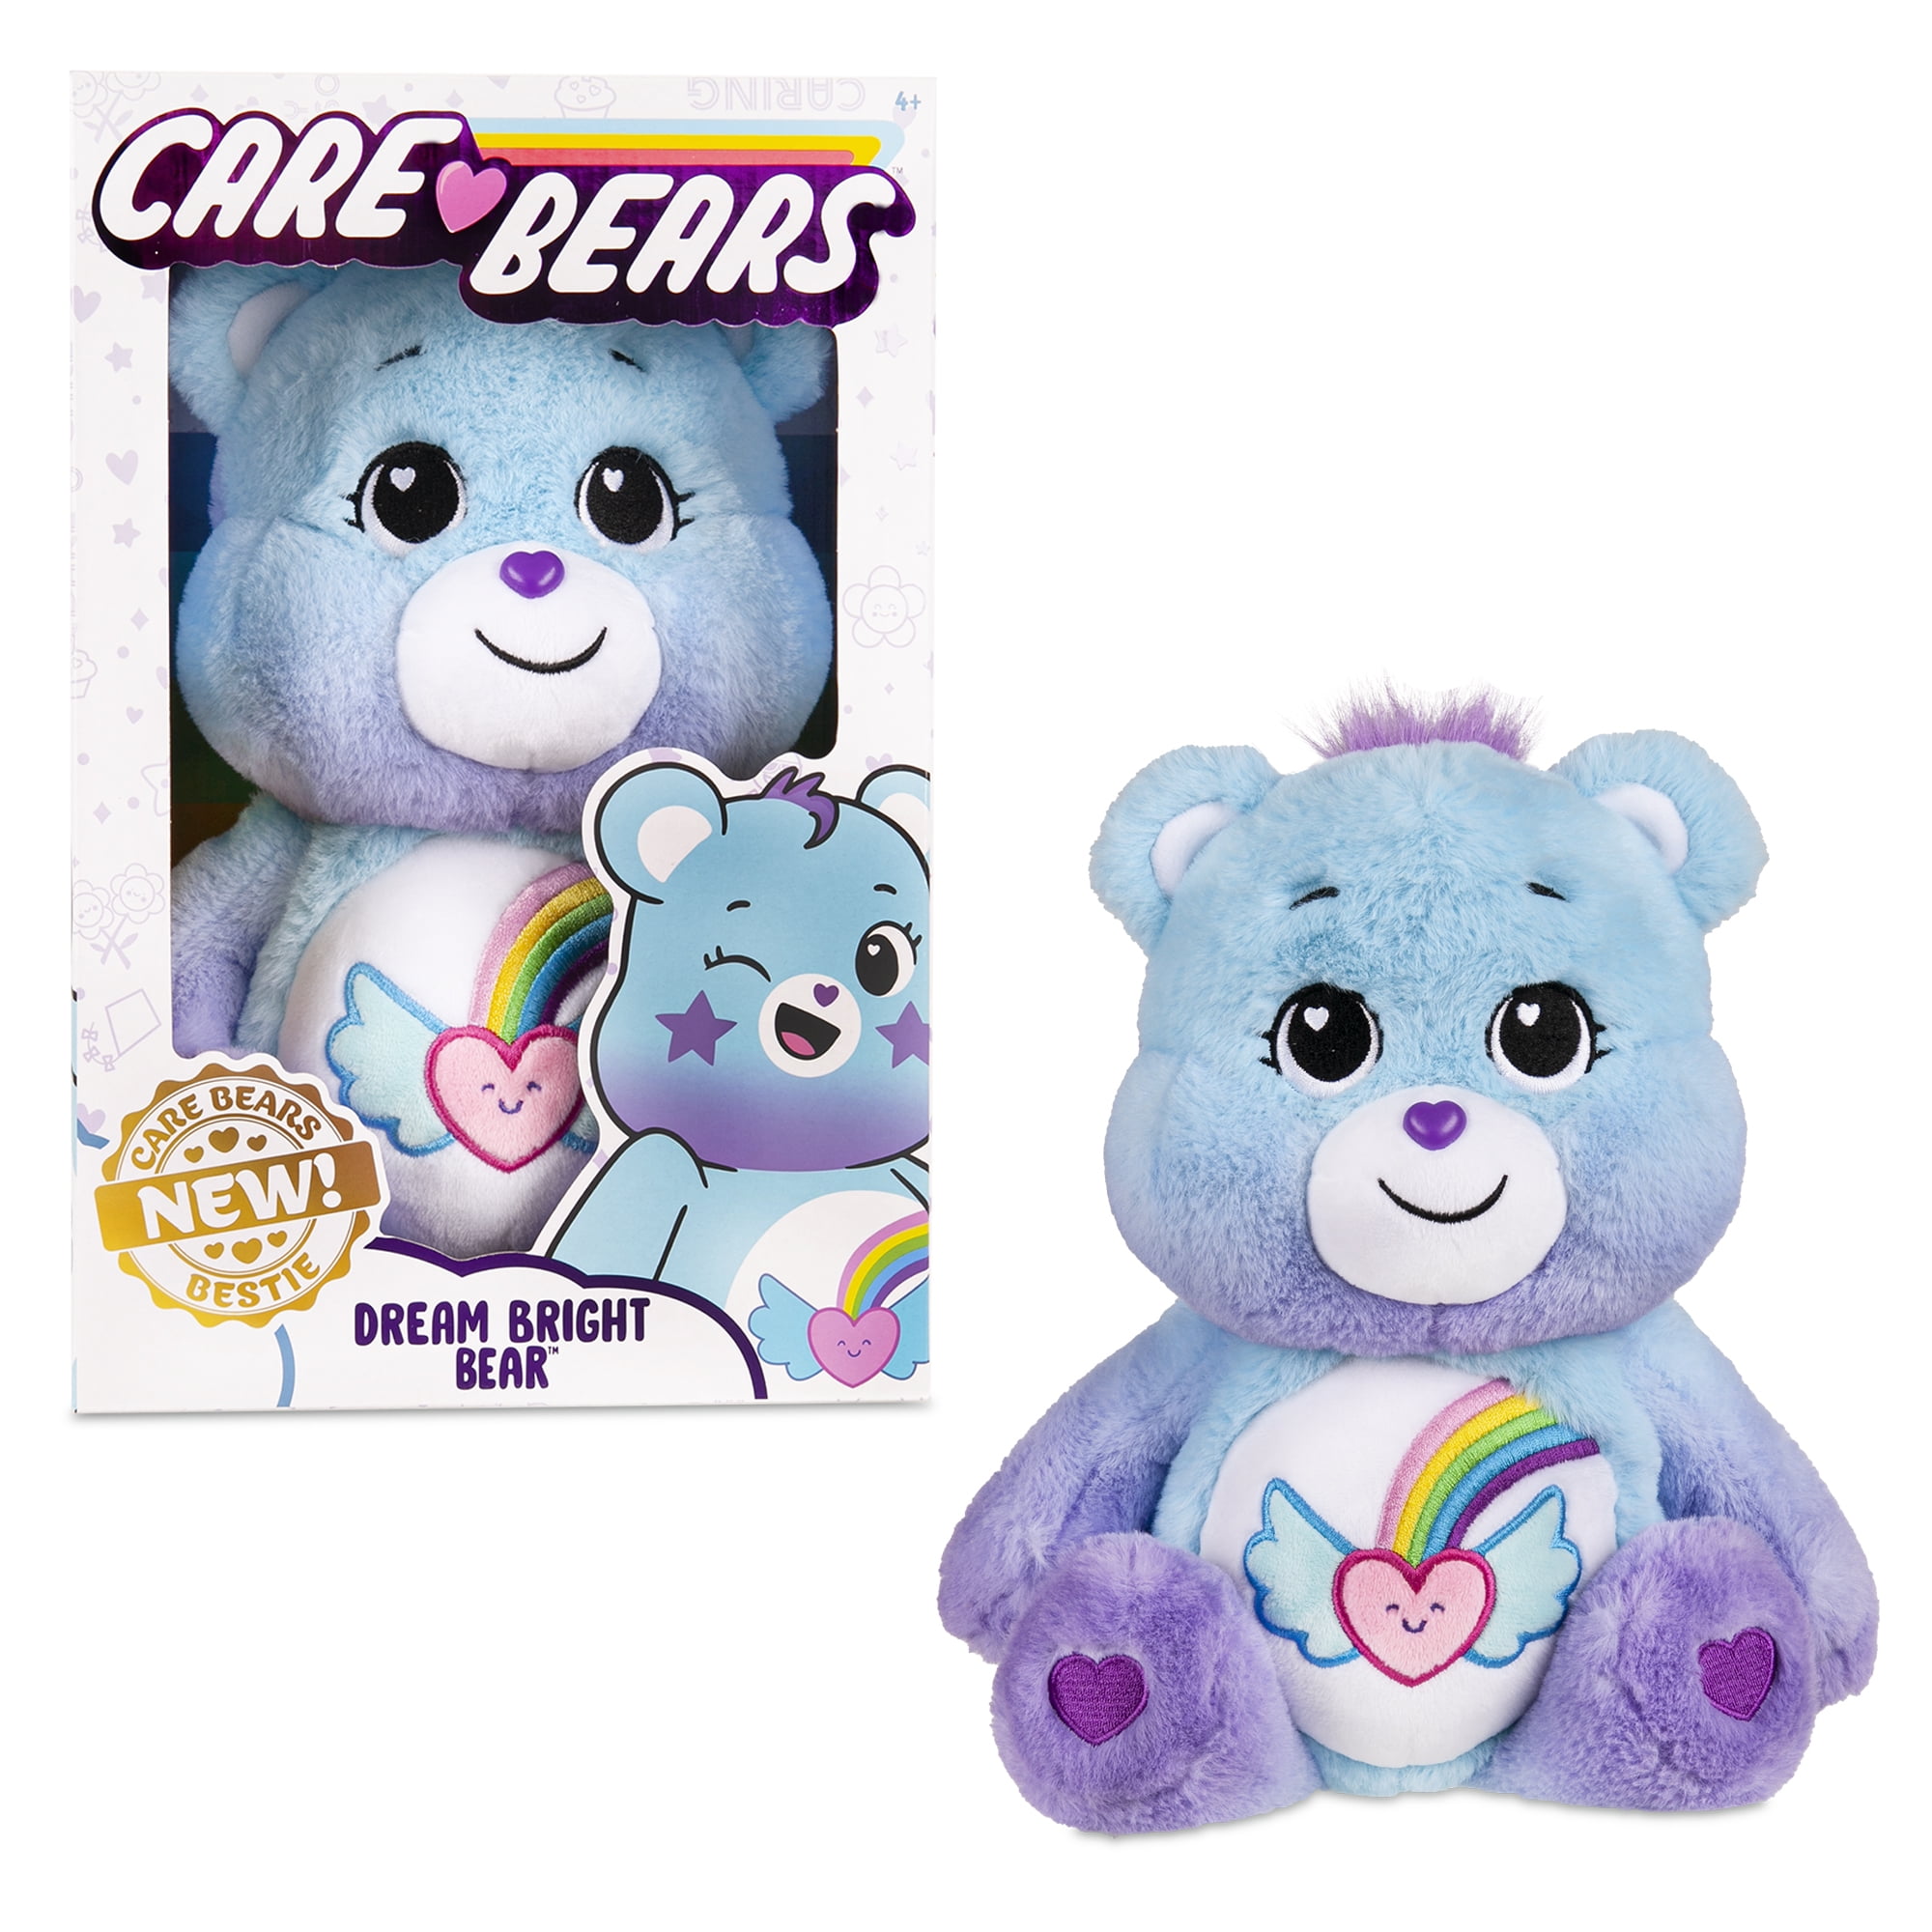 NEW OFFICIAL 12" CARE BEAR BEDTIME BEAR SOFT PLUSH TOY Supplies 